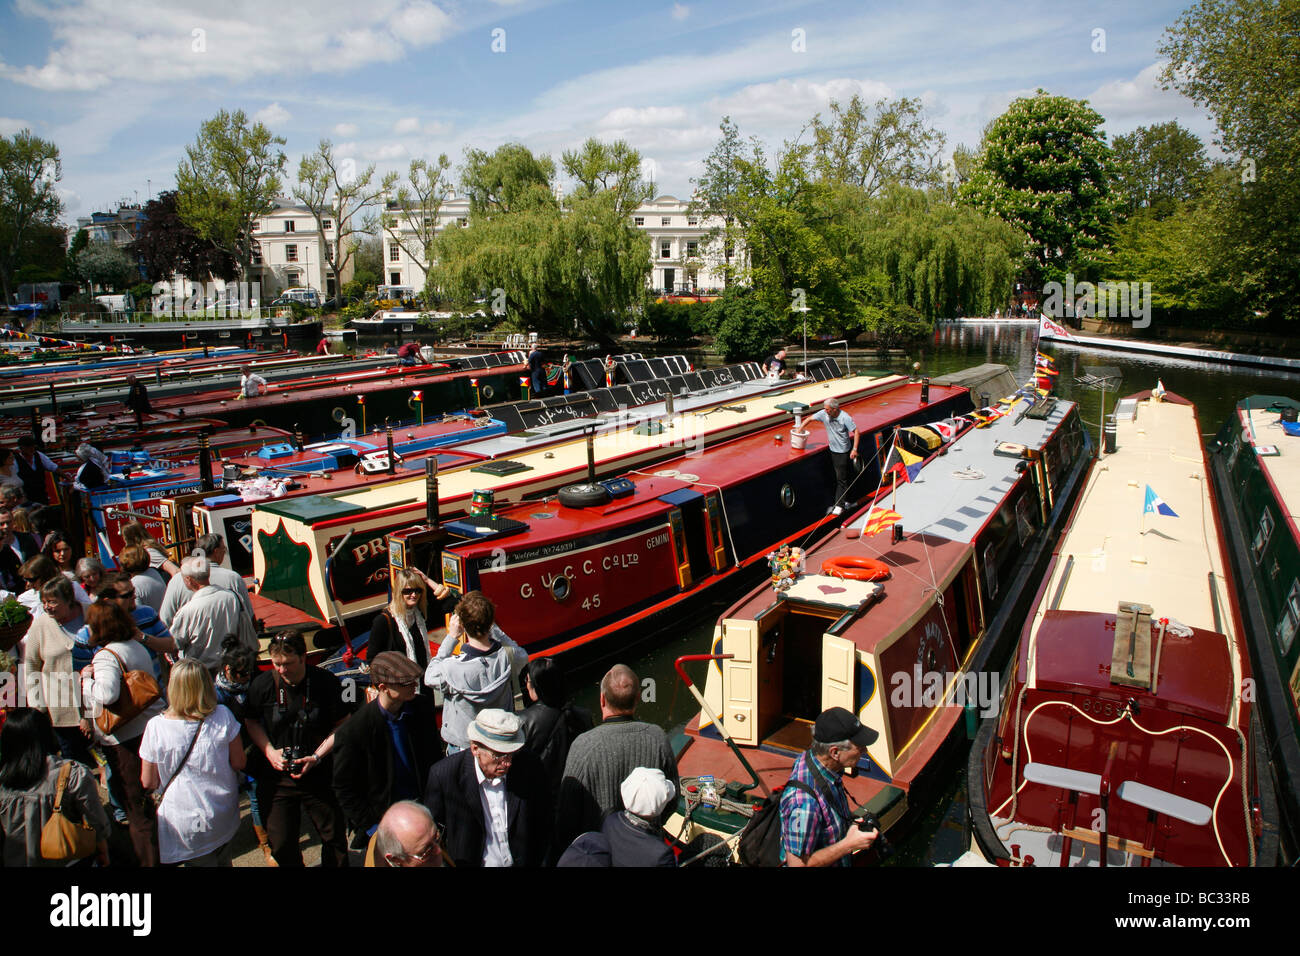 Canal boats moored in Little Venice during Canalway Cavalcade, Maida Vale, London, UK Stock Photo